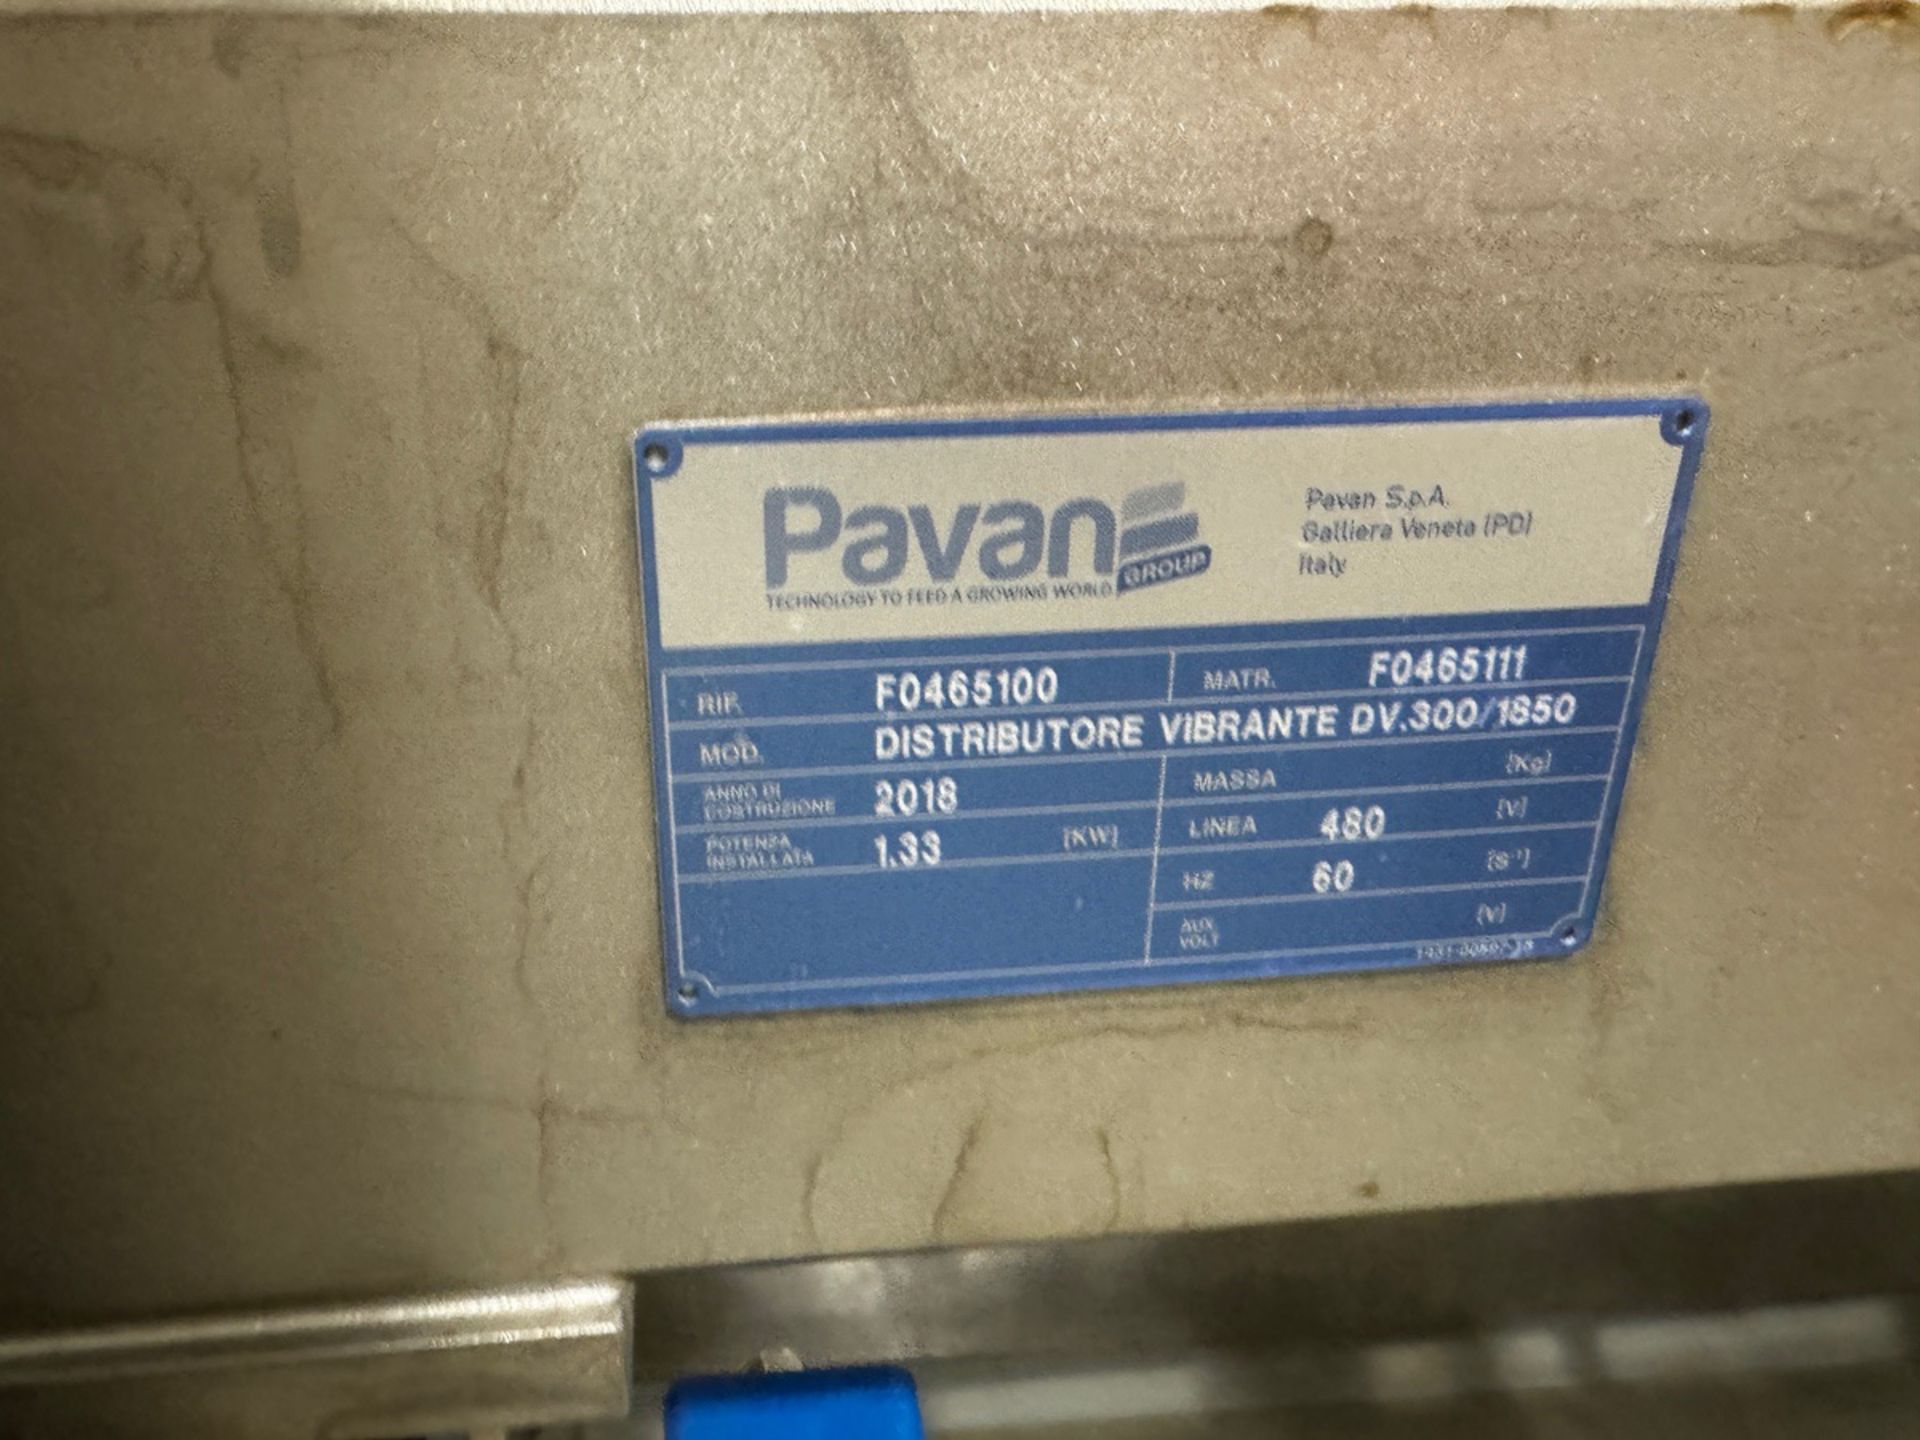 2018 Pavan Vibratory Conveyor to Feed Incline to OctoFrost - Subj to Bulk | Rig Fee $250 - Image 2 of 2